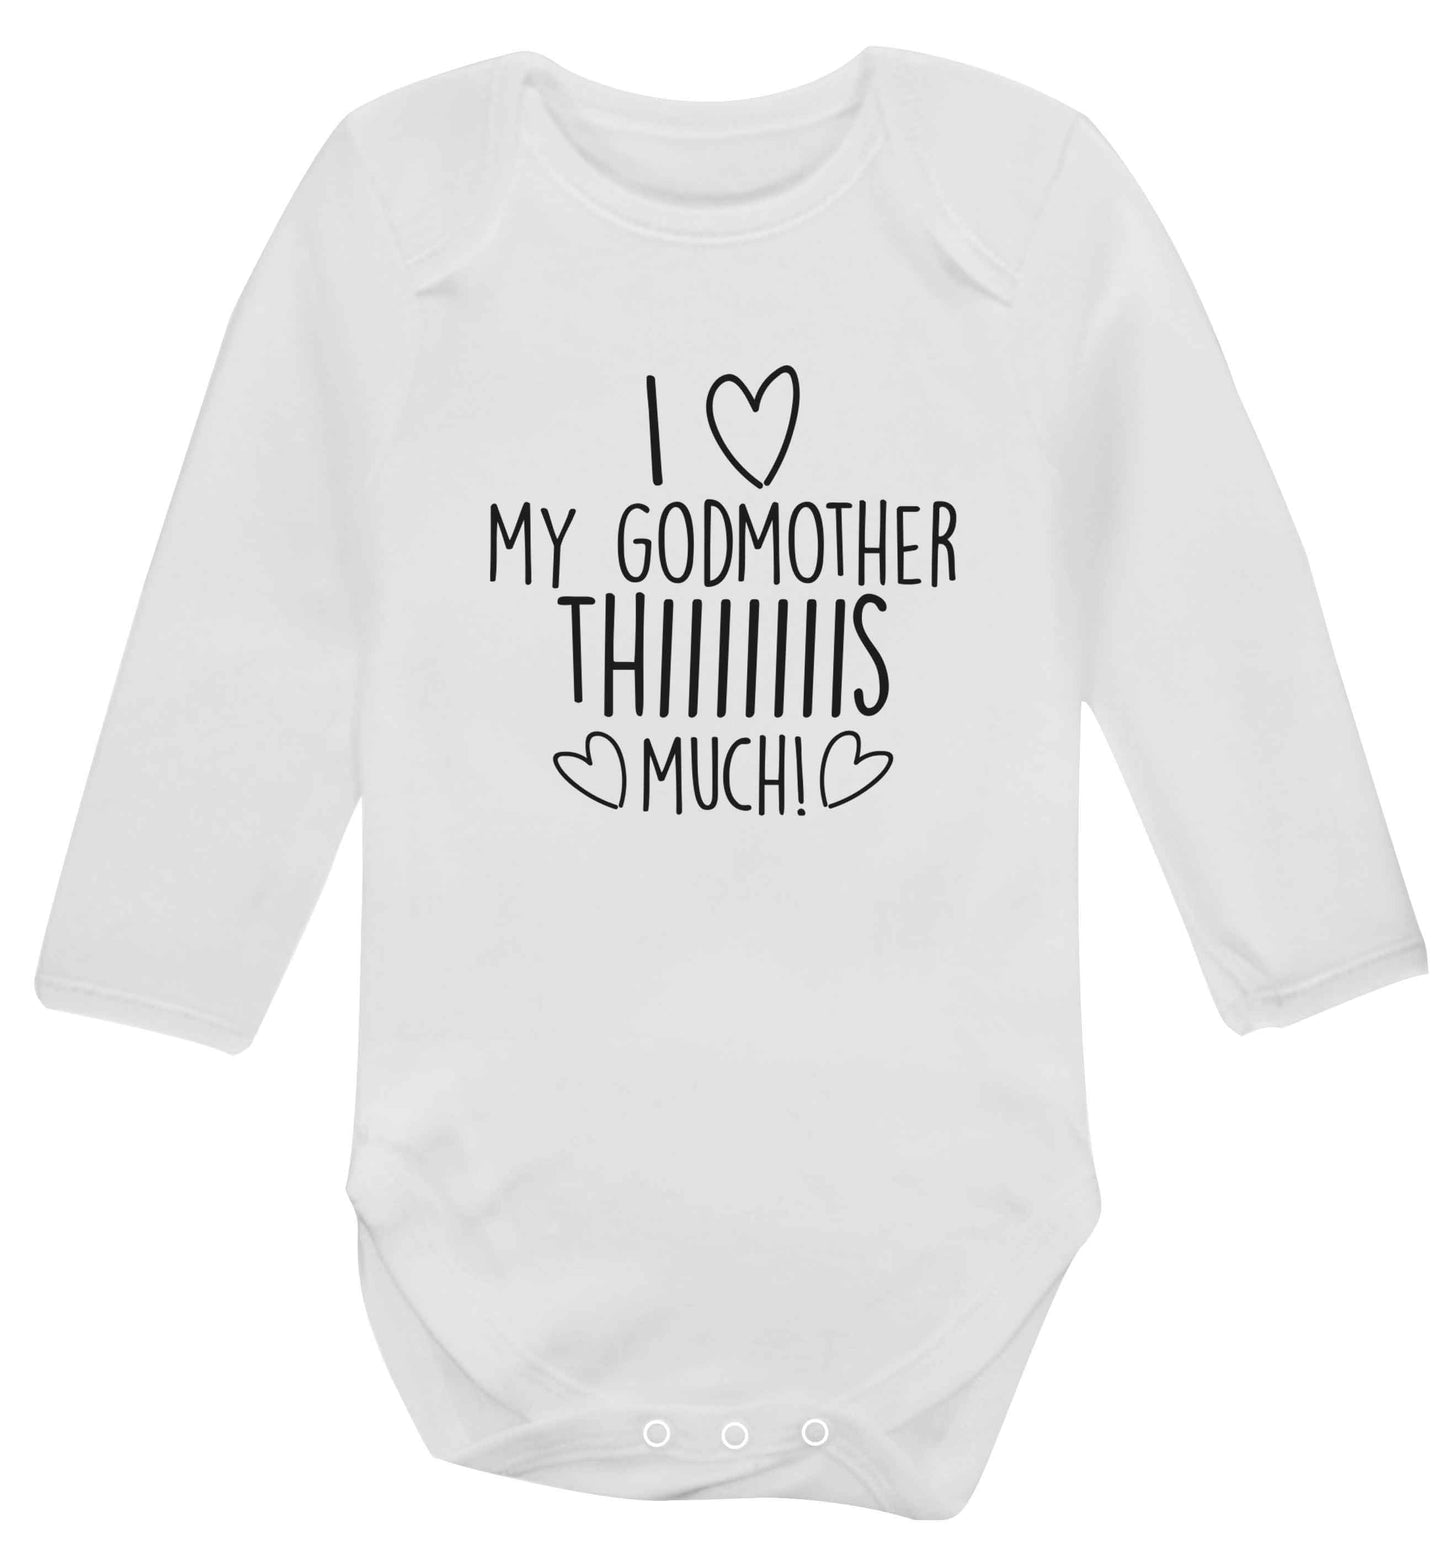 I love my Godmother this much baby vest long sleeved white 6-12 months